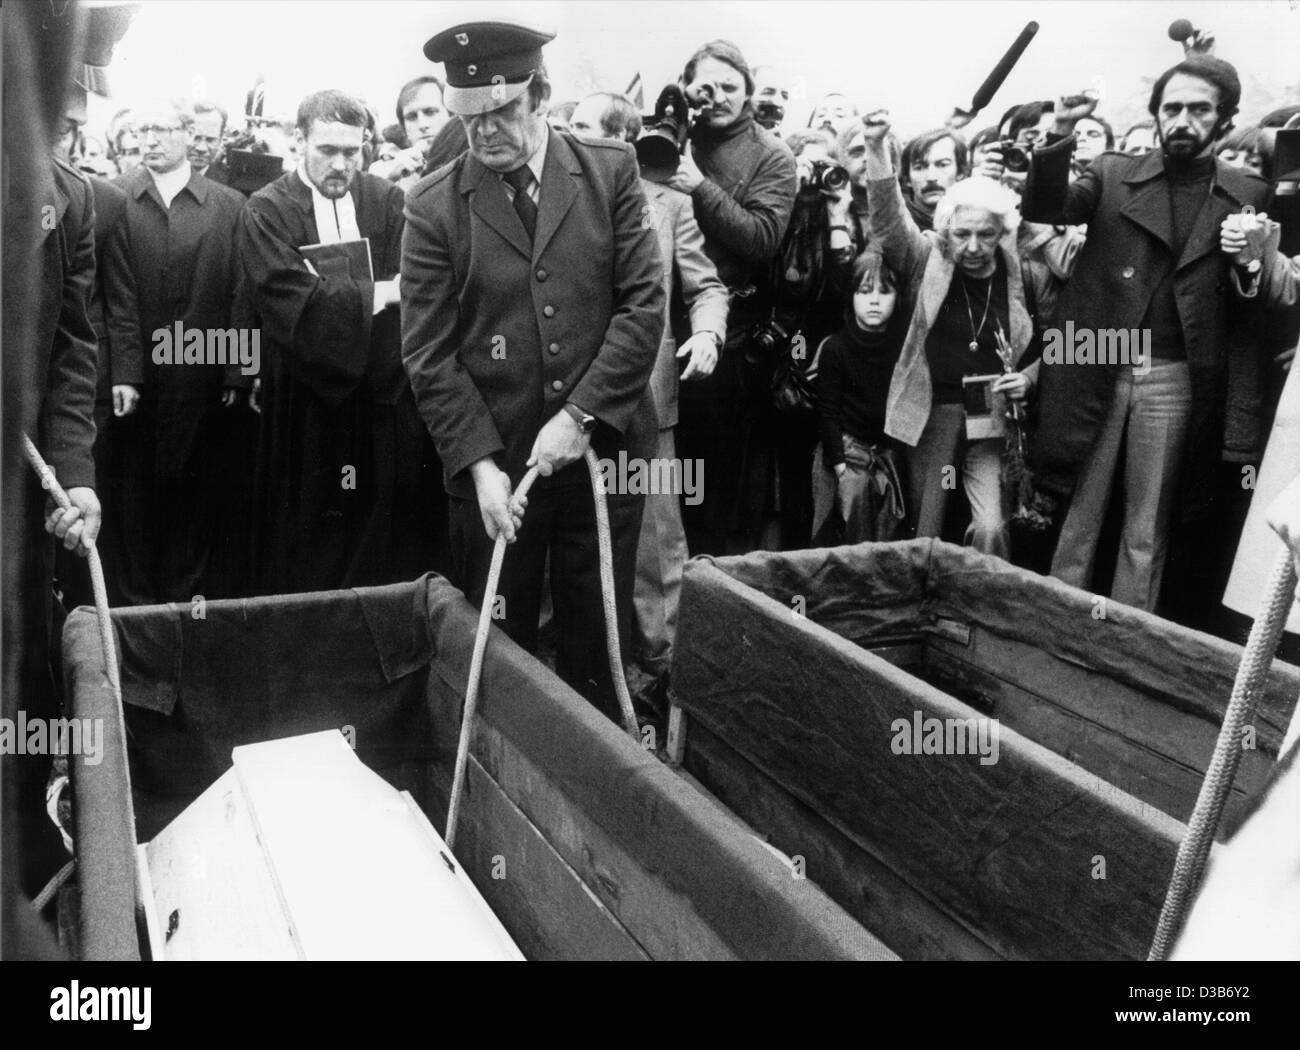 (dpa files) - People mourn at the grave of RAF terrorists Gudrun Ensslin, Andreas Baader and Jan Carl Raspe at the Dornfelden cemetery in Stuttgart, 27 October 1977. Raspe was tried with Ulrike Meinhof, Baader, and Gudrun Ensslin in a trial held on the grounds of Stuttgart's Stammheim prison. After  Stock Photo